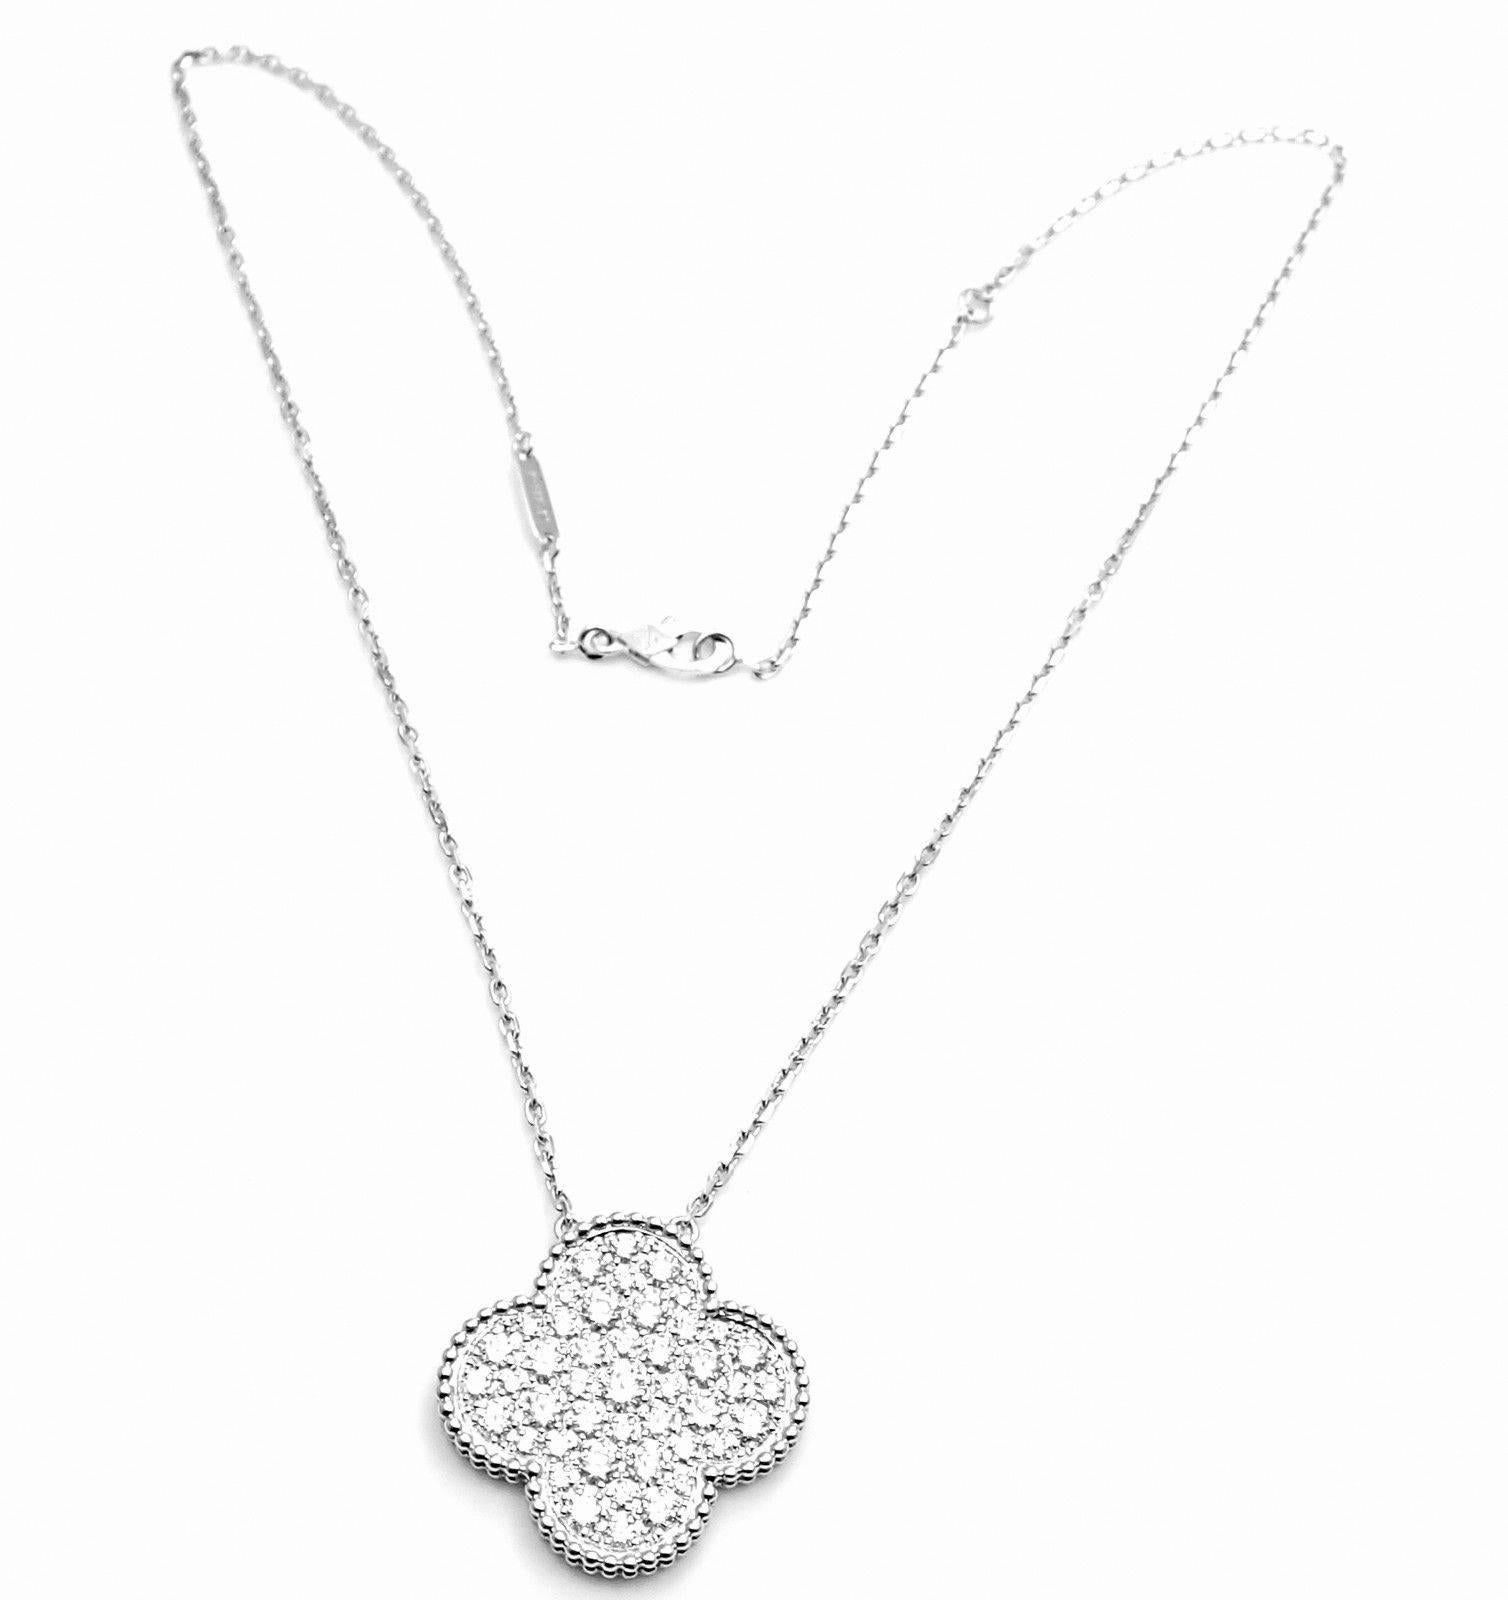 18k White Gold Diamond Magic Alhambra Pendant Necklace 
With 45 round brilliant cut diamonds VVS1 clarity, E color 
total weight approx. 2.44ct
This necklace comes with Van Cleef & Arpels box and a Van Cleef & Arpels service paper from 
VCA store in